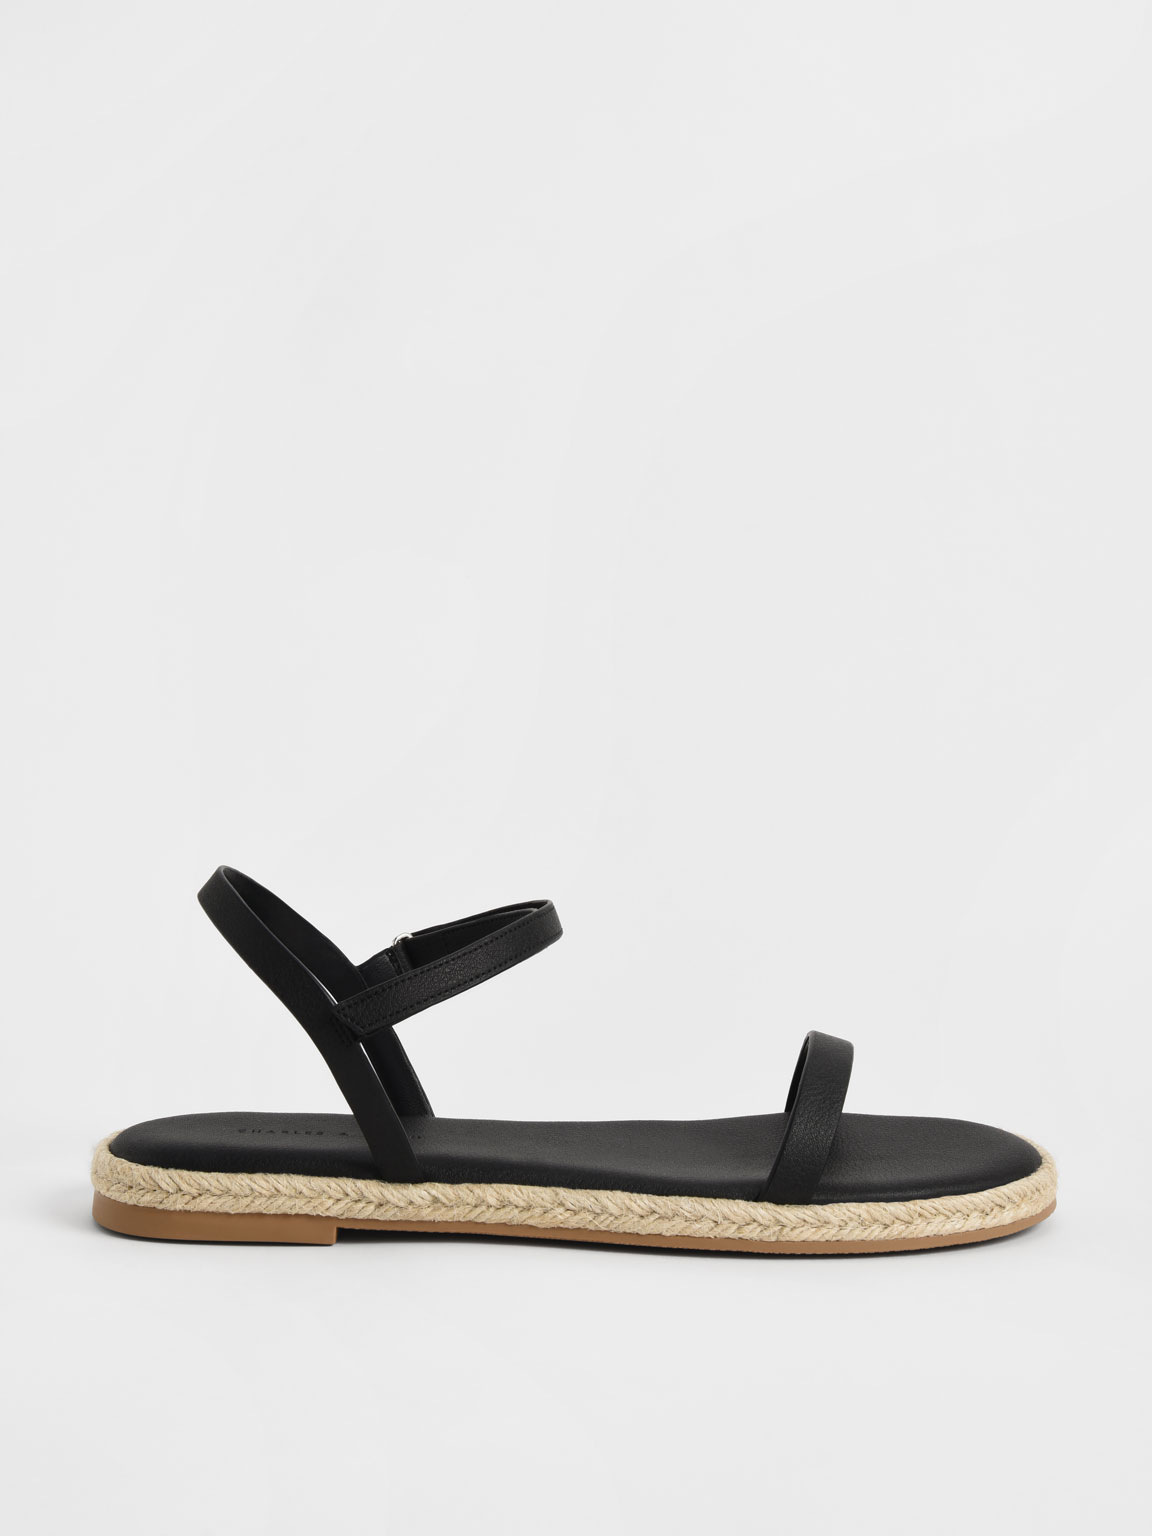 Black Ankle-Strap Flat Espadrille Sandals - CHARLES & KEITH AE